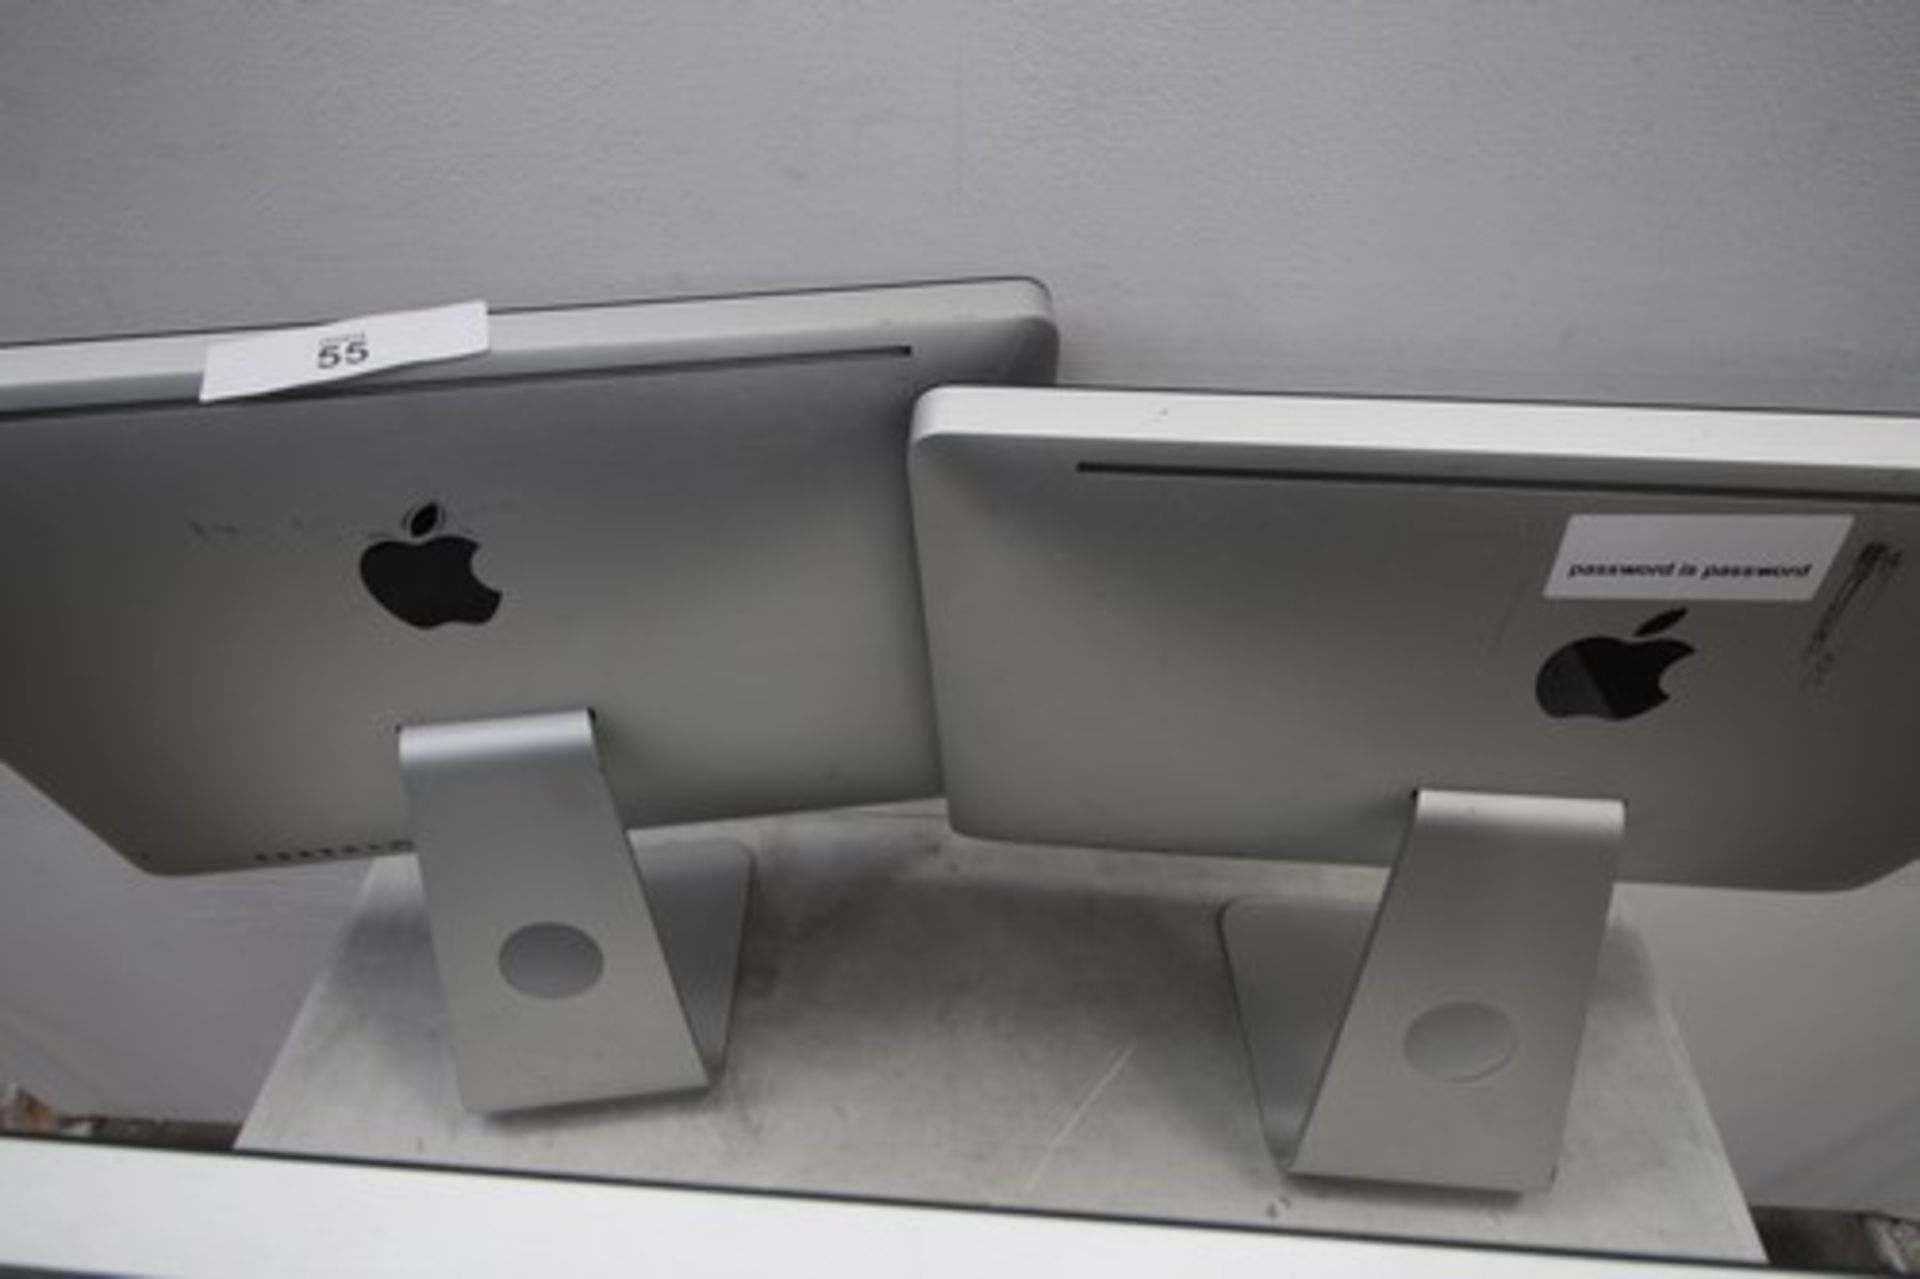 3 x Apple iMac 21.5" desktop computers, model No: A1311, powers on ok, not tested - second-hand ( - Image 4 of 4